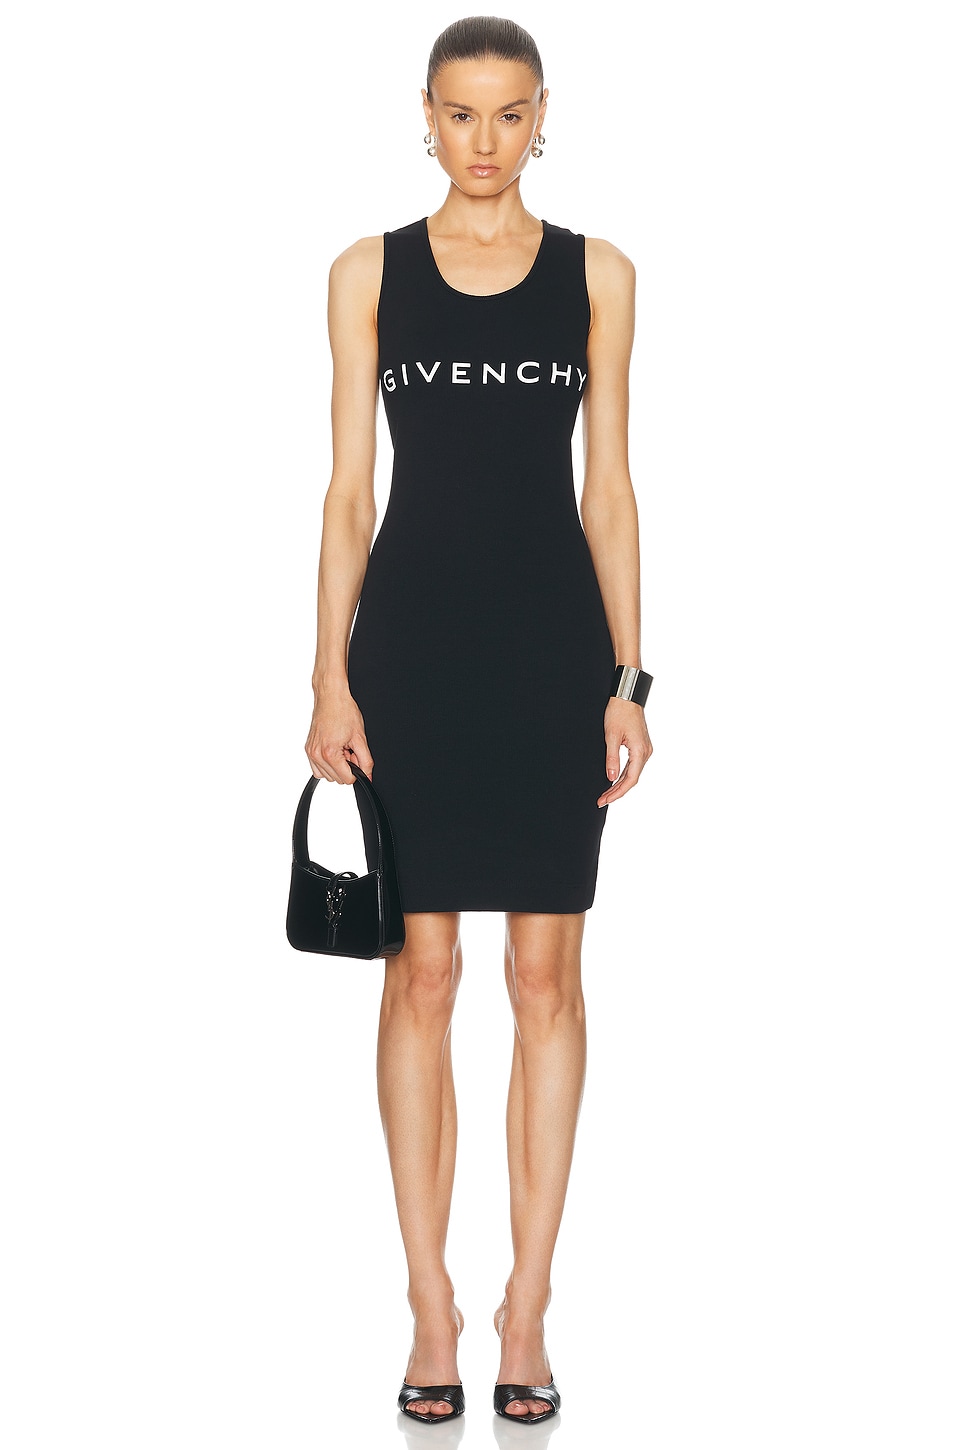 Image 1 of Givenchy Tank Top Mini Dress in Black